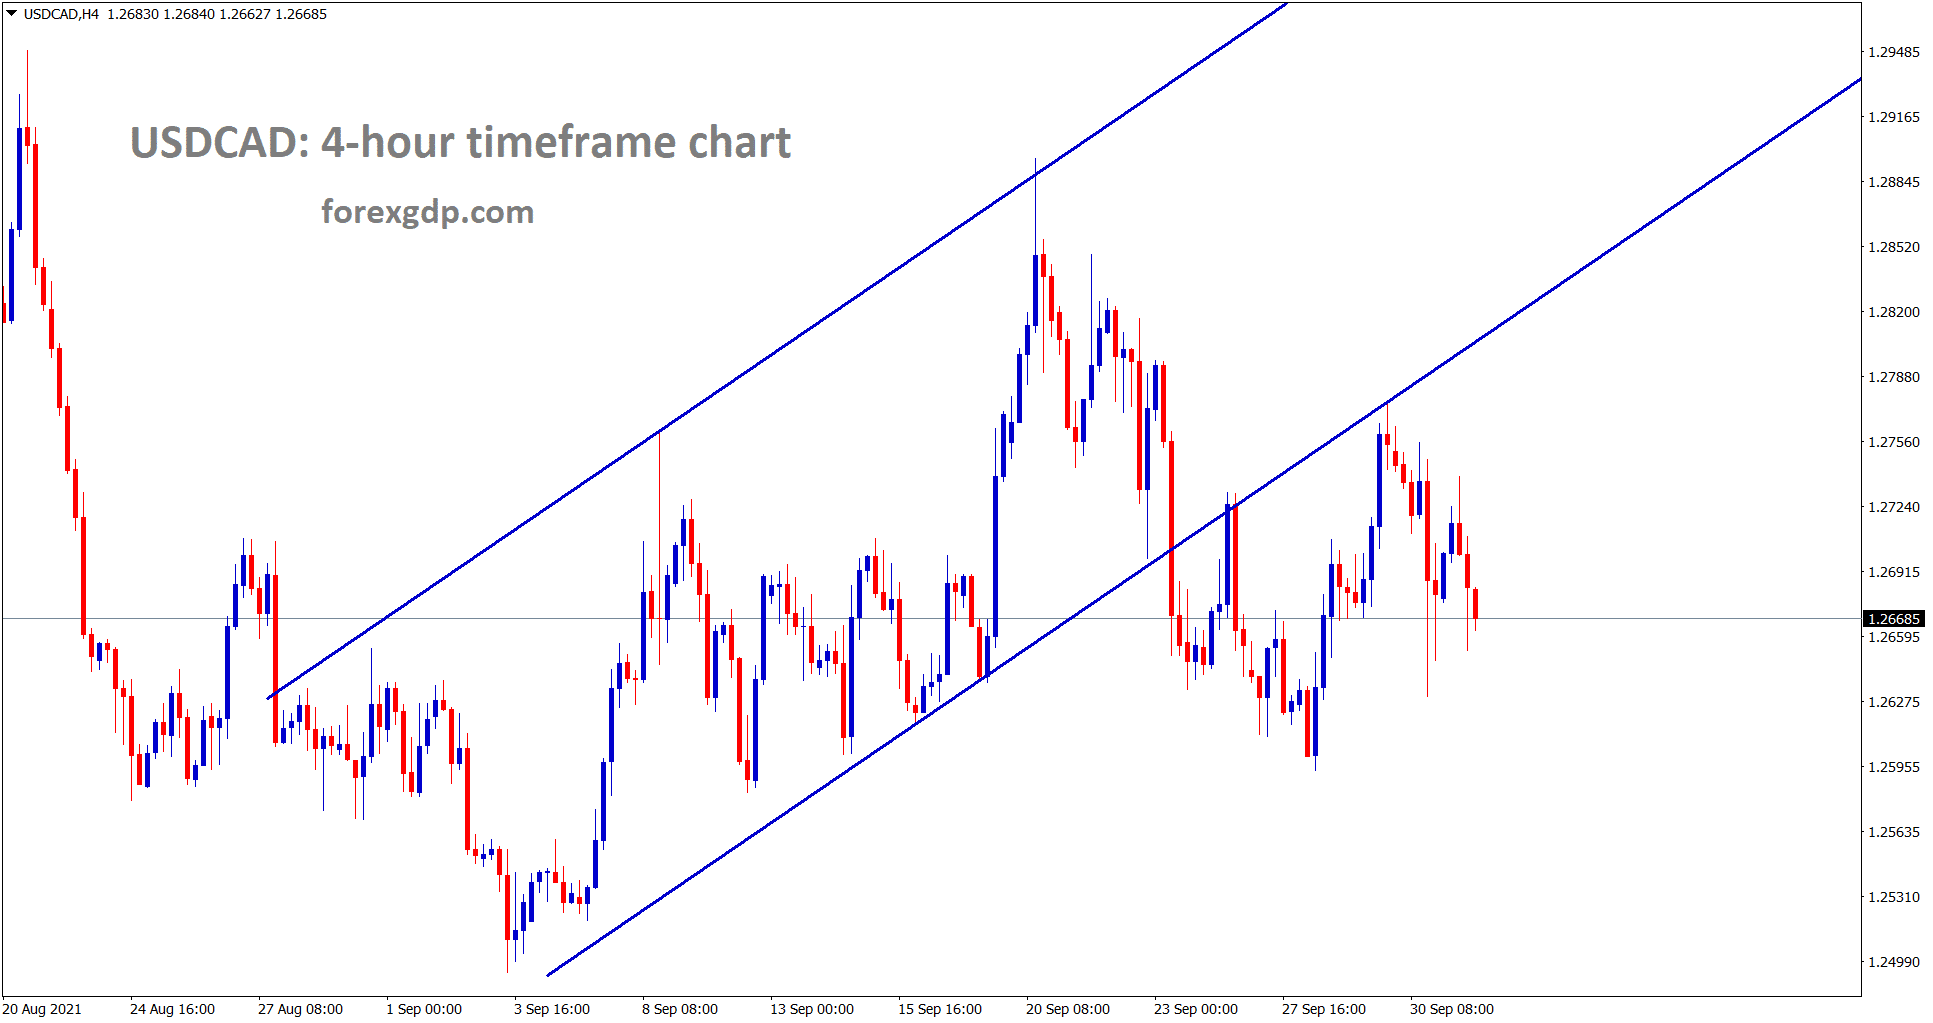 USDCAD has retested the breakout level of the ascending channel twice